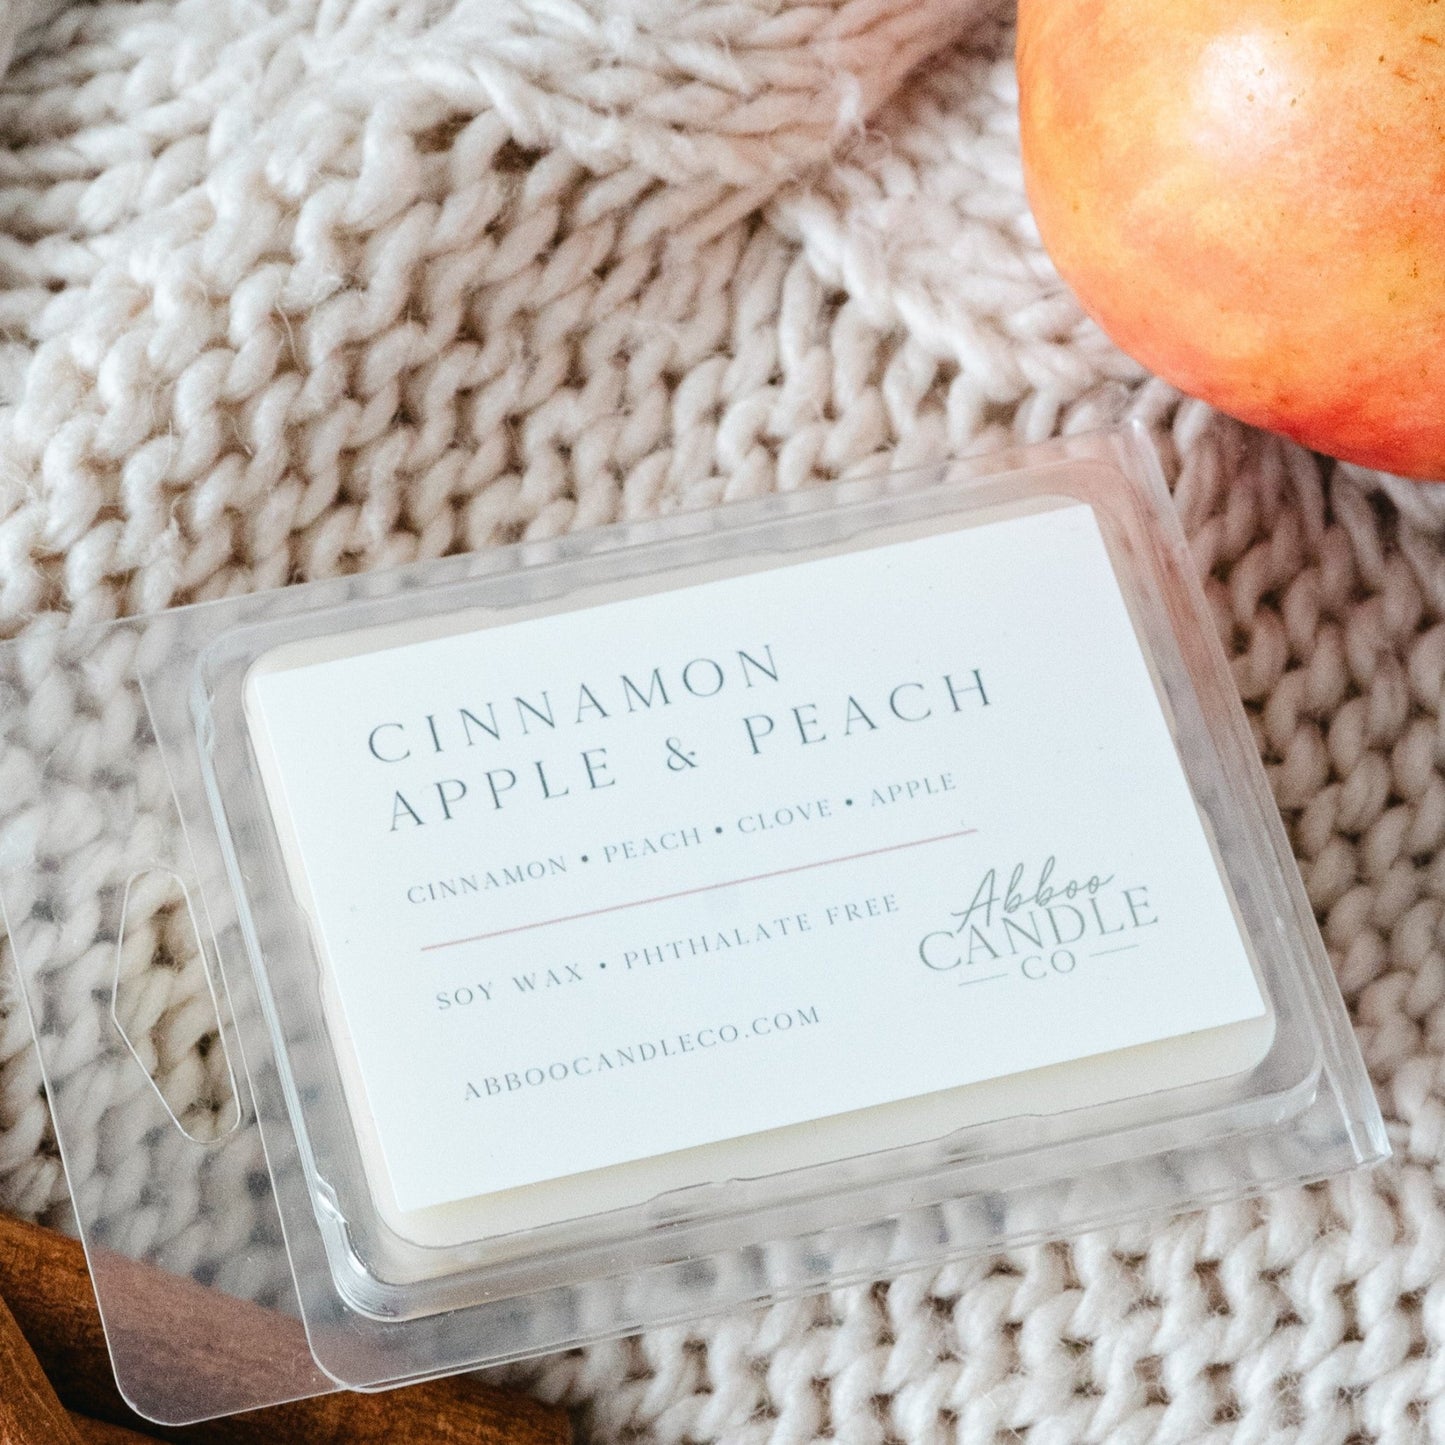 Cinnamon Apple and Peach Soy Wax Melts - Abboo Candle Co